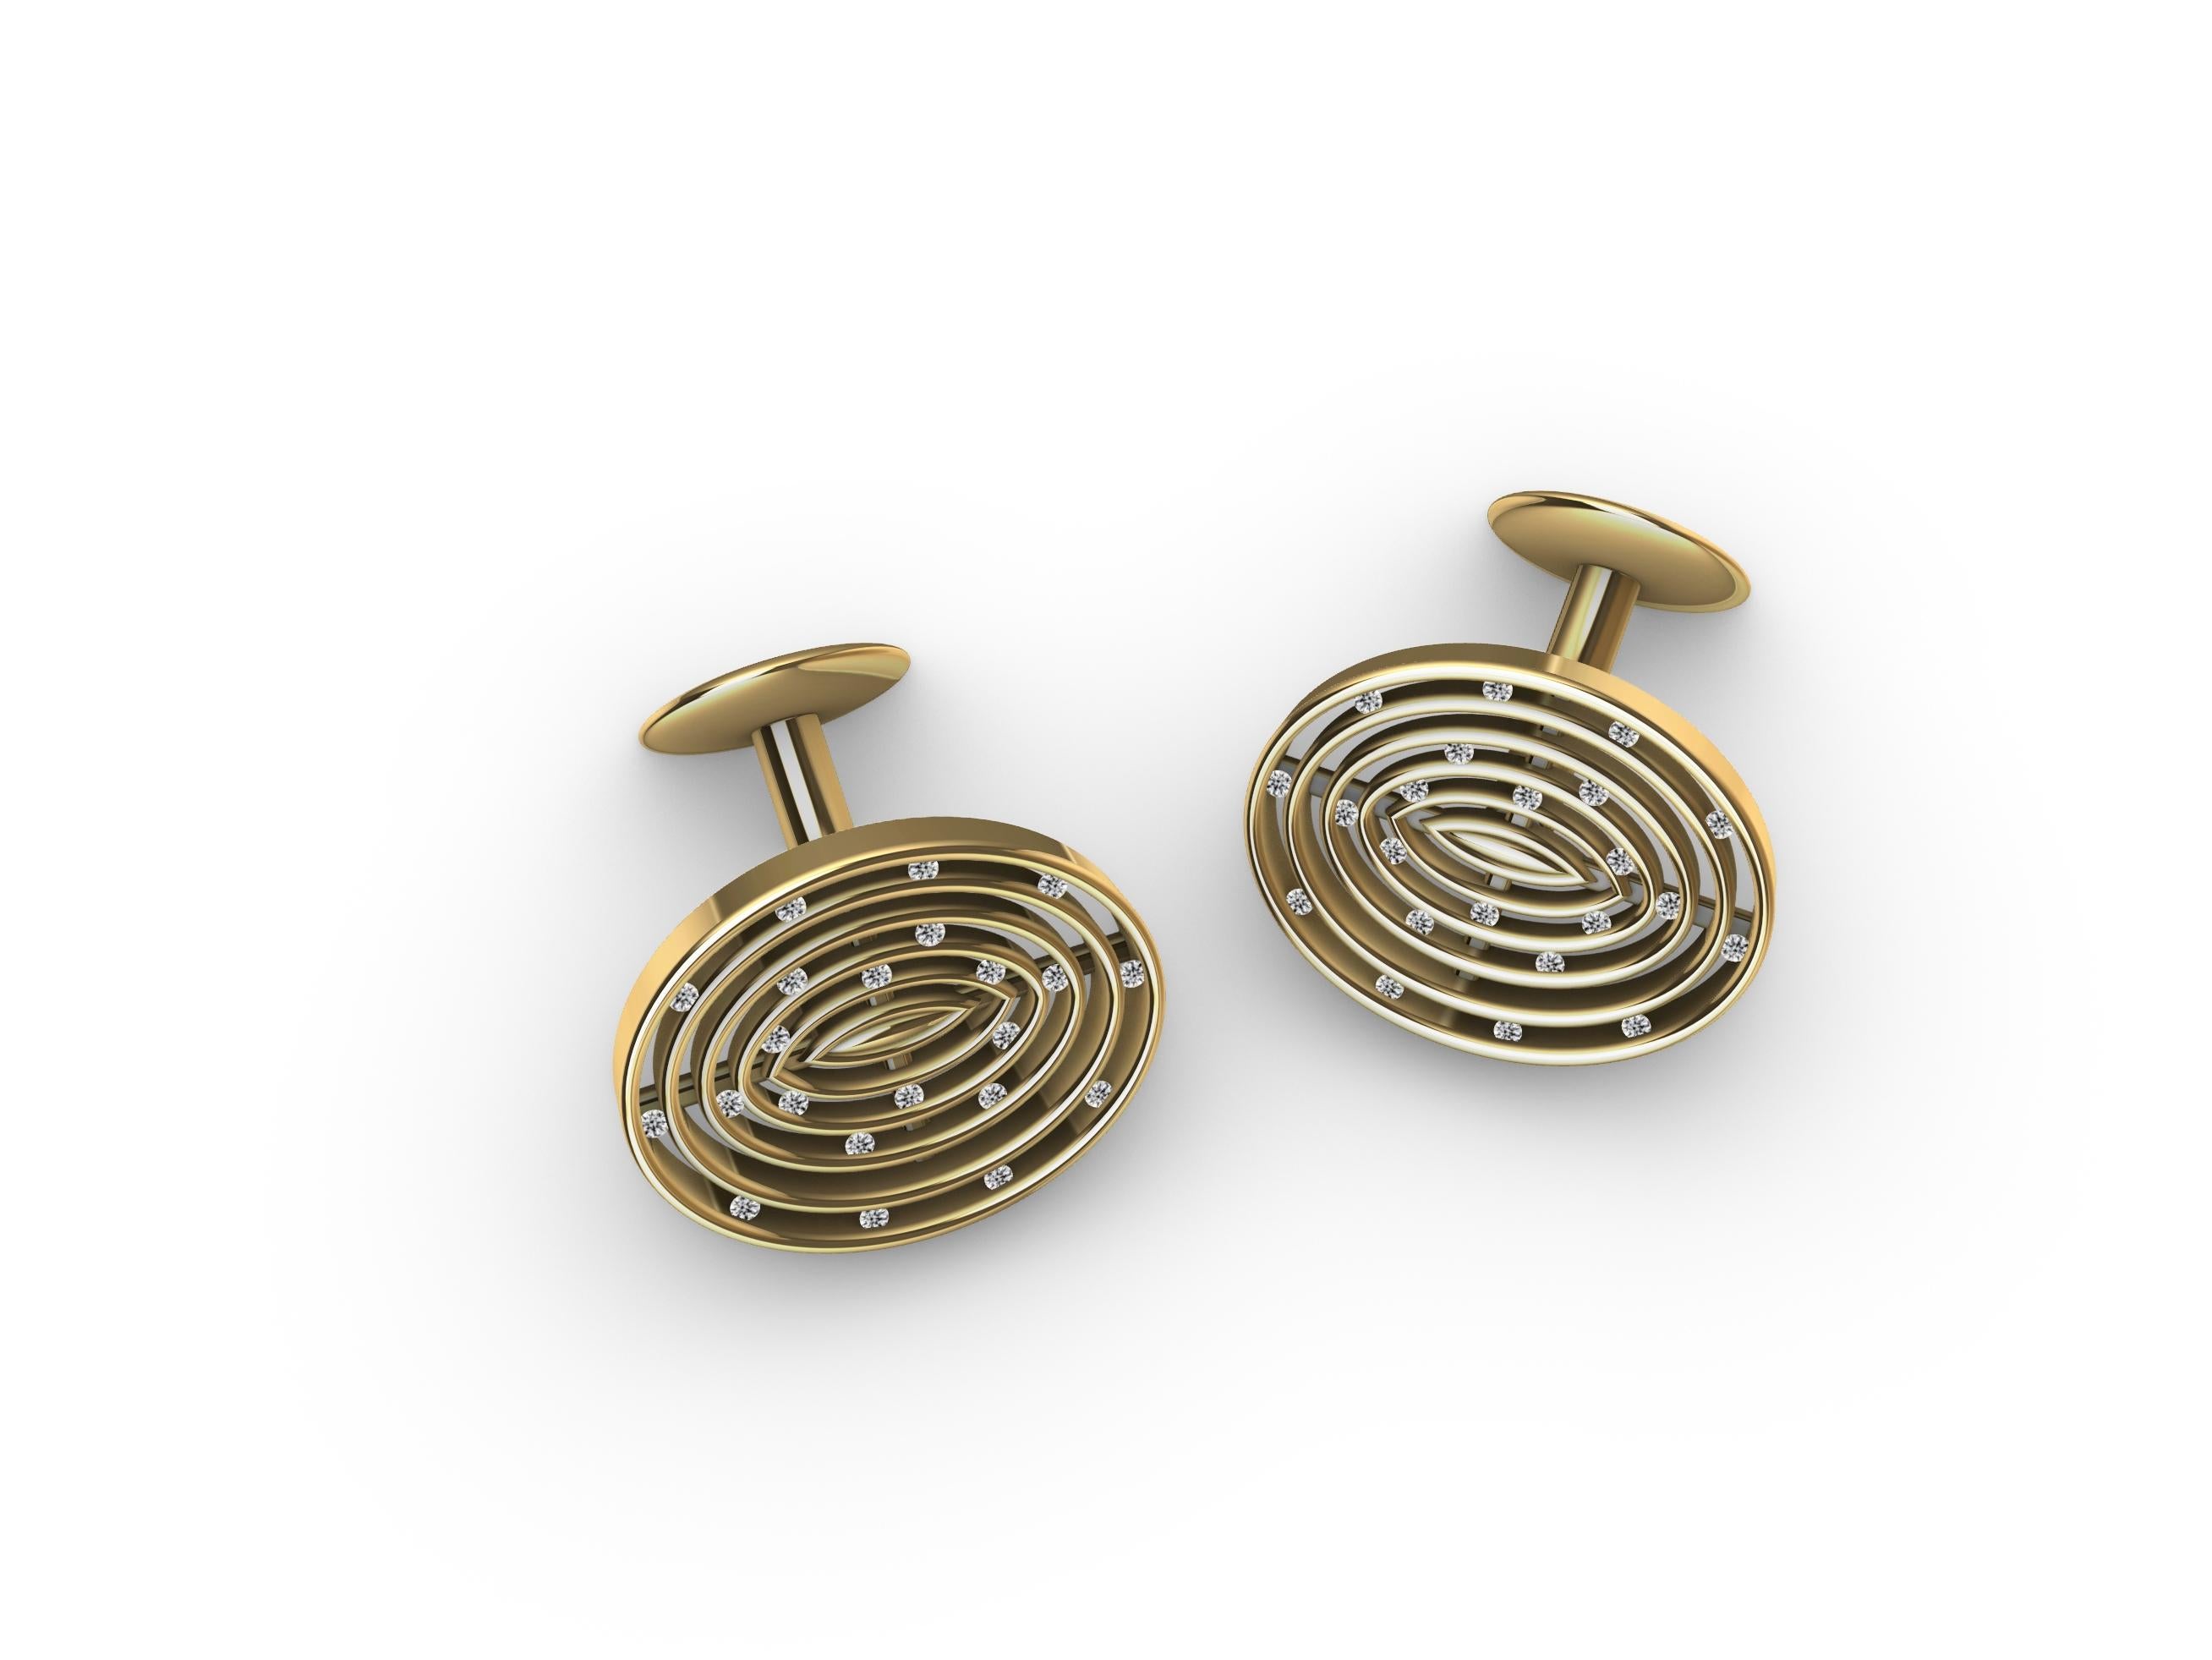 18 Karat Yellow Gold Concave Diamonds Cuff Links From the optical cufflinks series. Open Air Series, Inspired by light and air, these cufflinks keeps it interesting. Consider it a sculpture for your shirt cuffs. Simple and subtle changes on the top